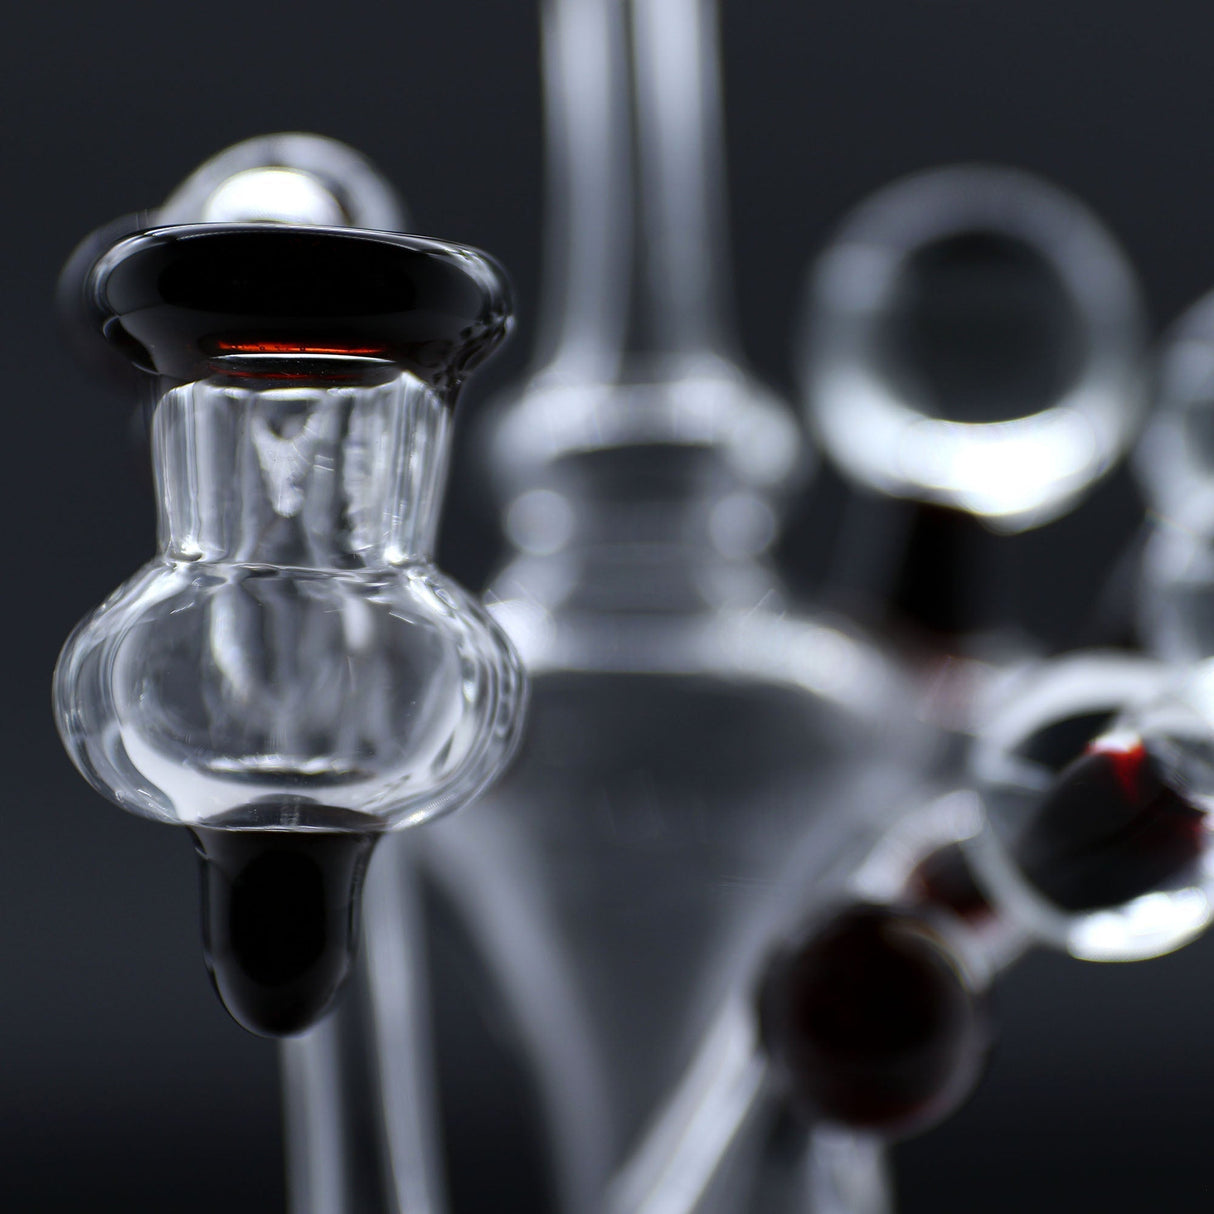 Clayball Glass "Crimson Dreams" Heady Recycler Dab-Rig Close-Up, USA Made, 14mm Joint